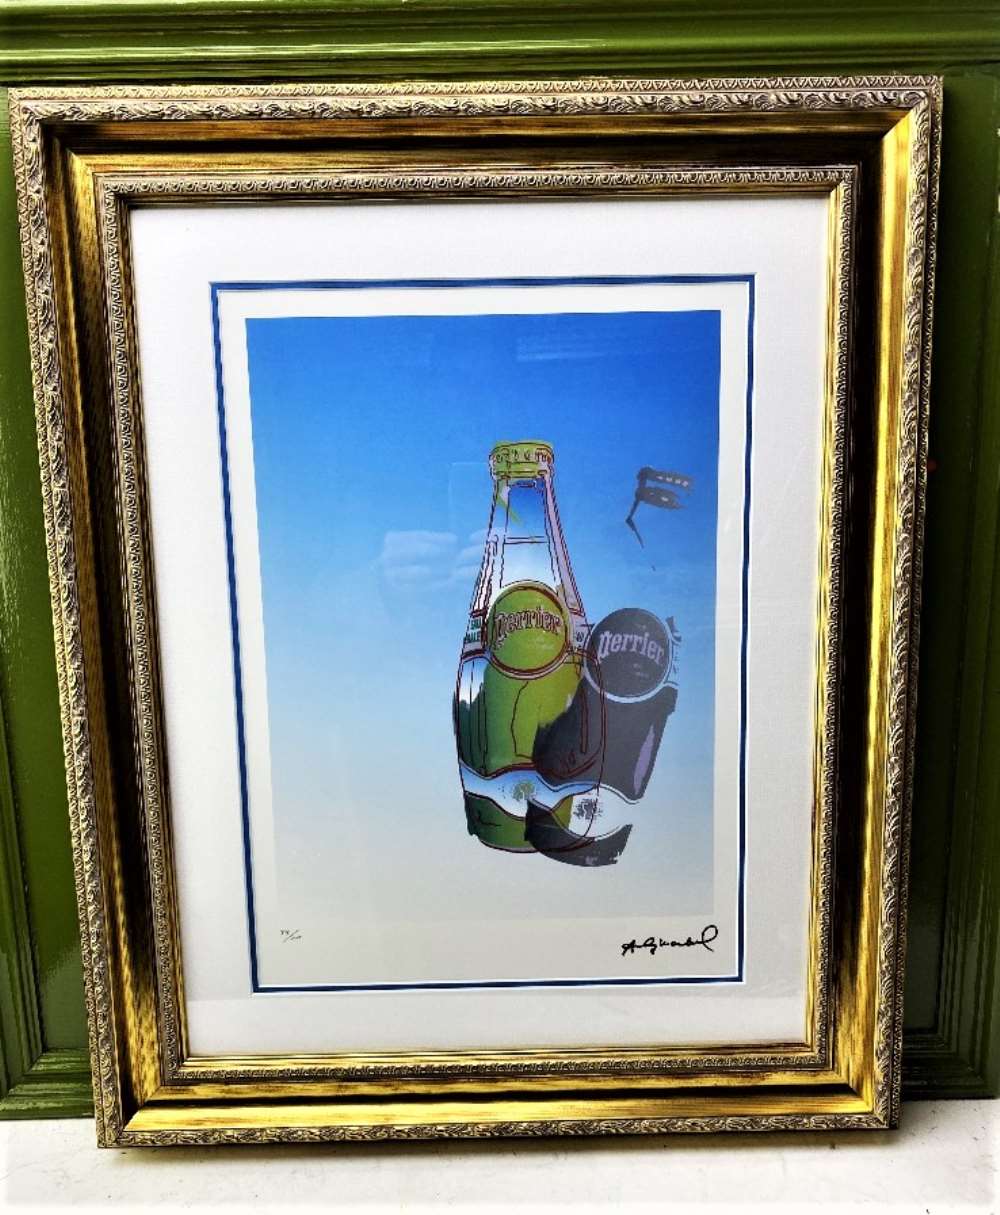 Andy Warhol (1928-1987) “Perrier” Leo Castelli- New York Numbered Ltd Edition of 100 Lithograph-#73,